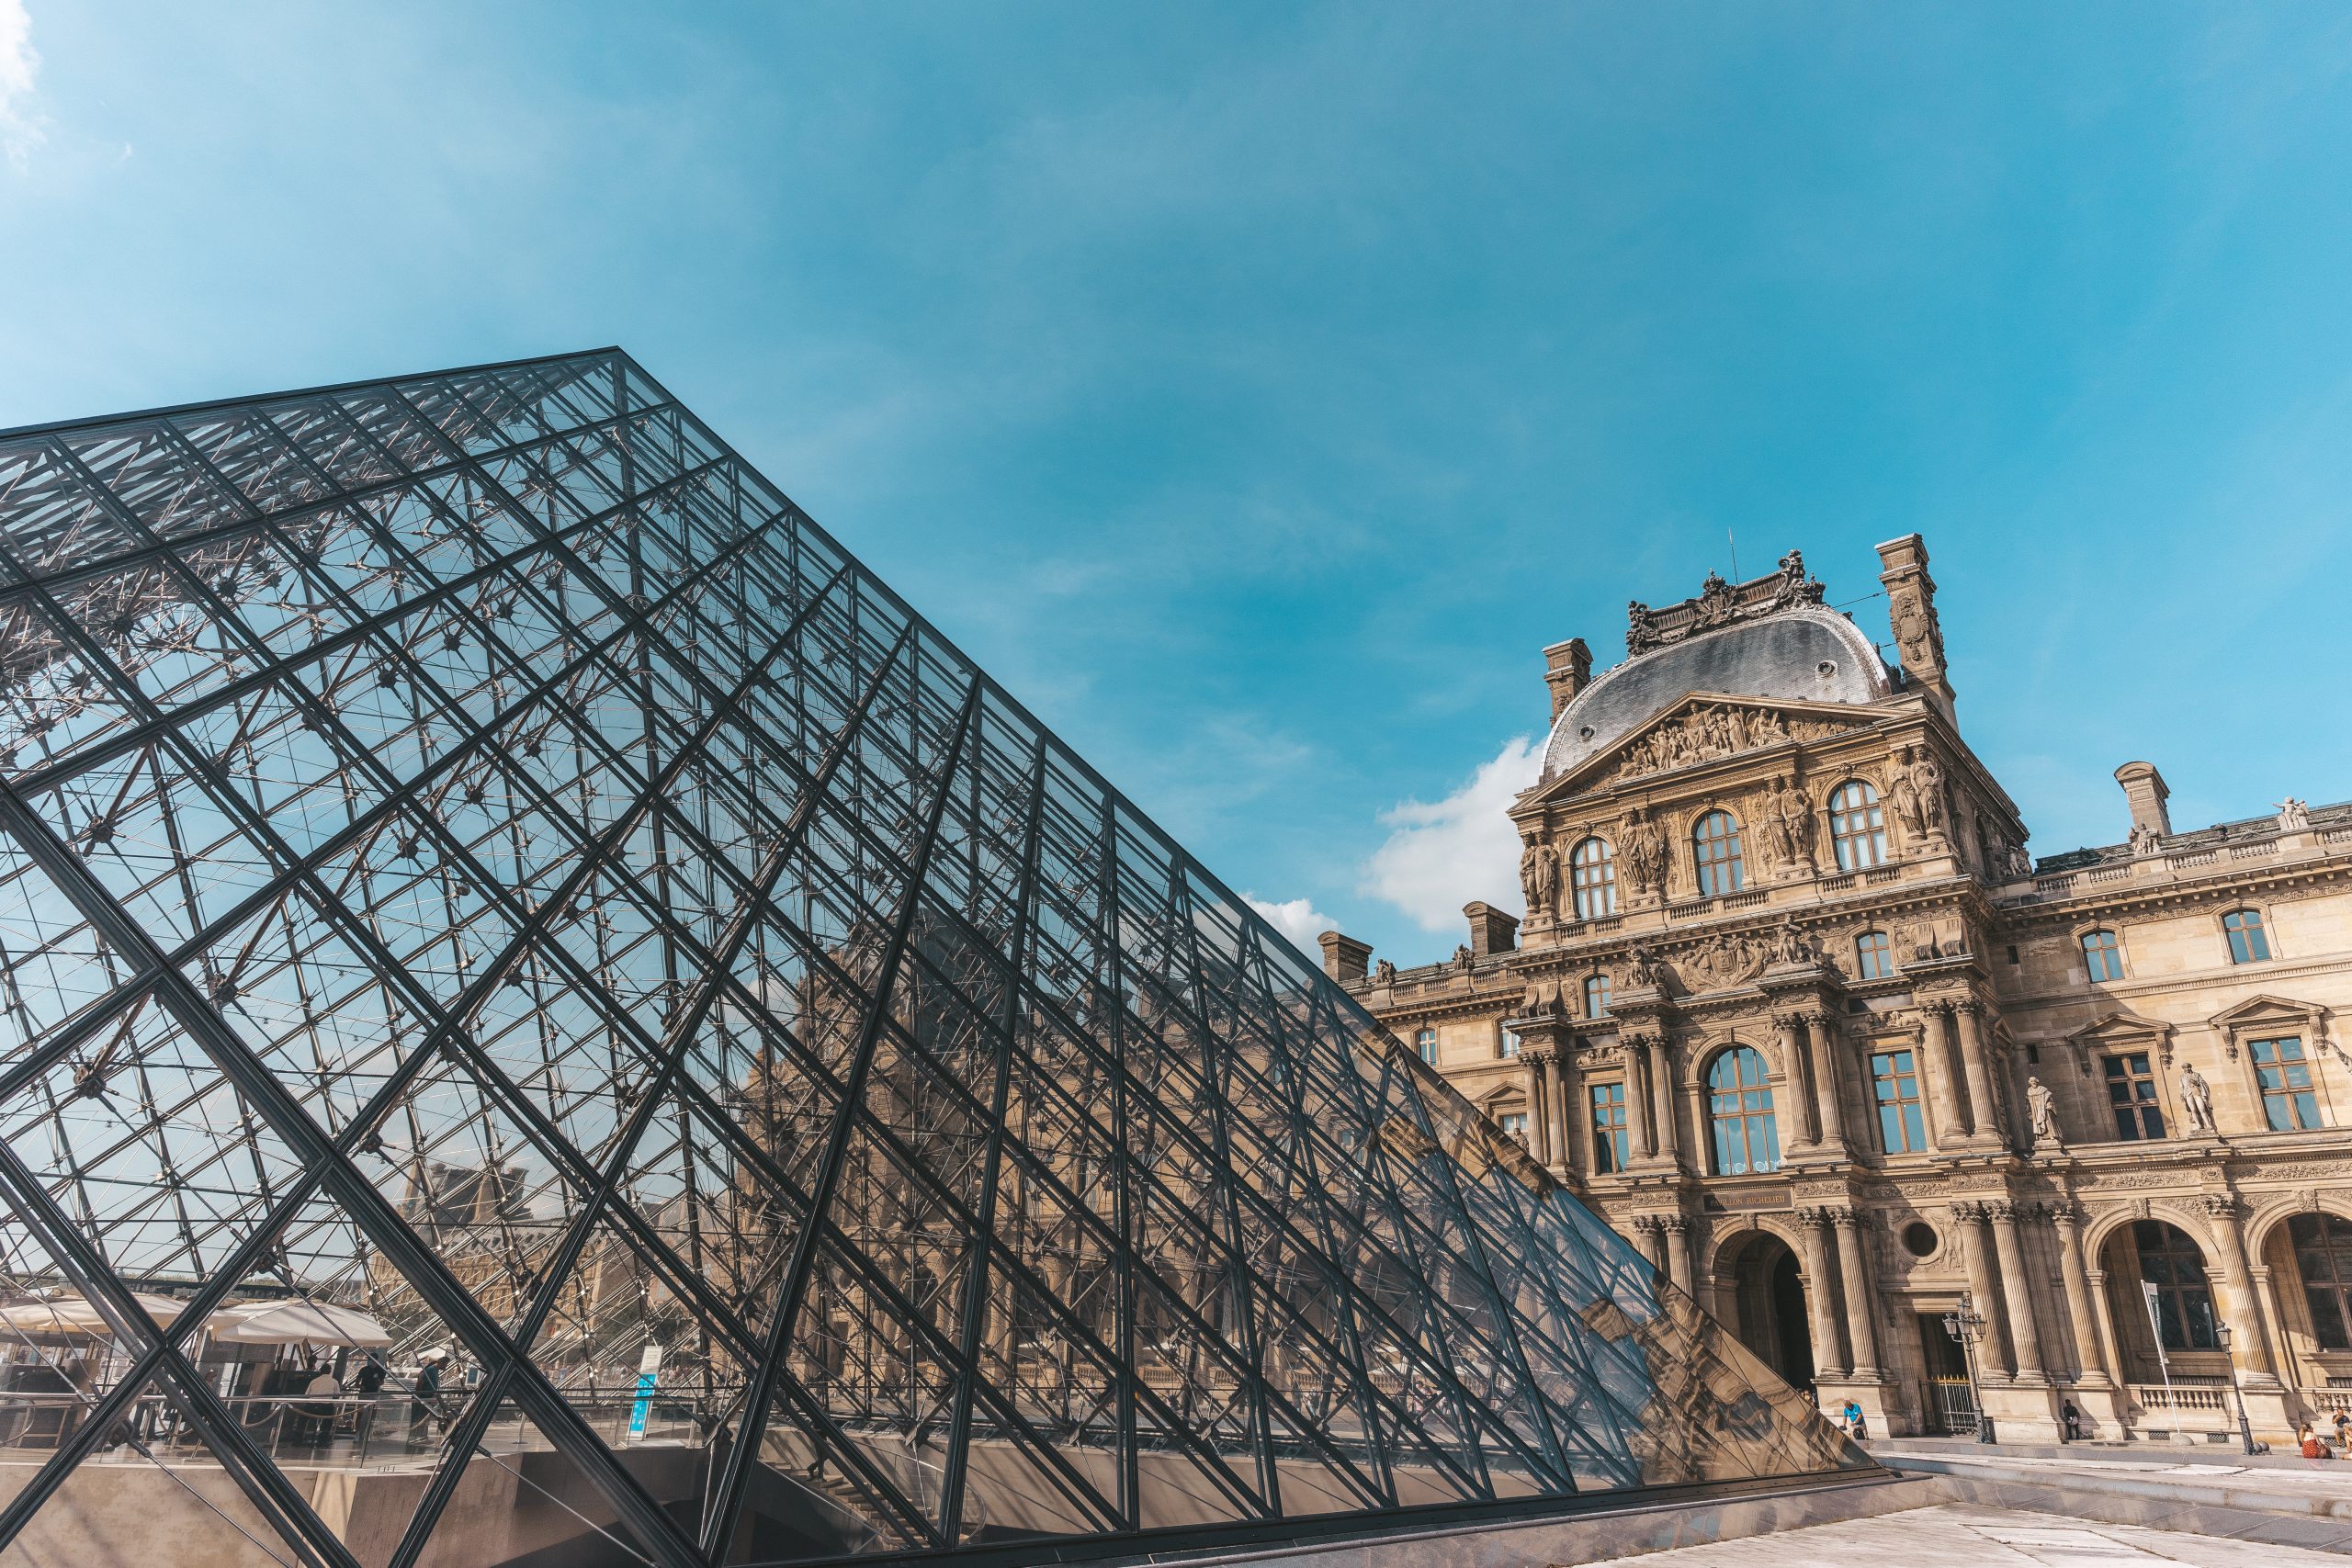 Louvre museum visitors dropped more than 70% in virus-wracked 2020